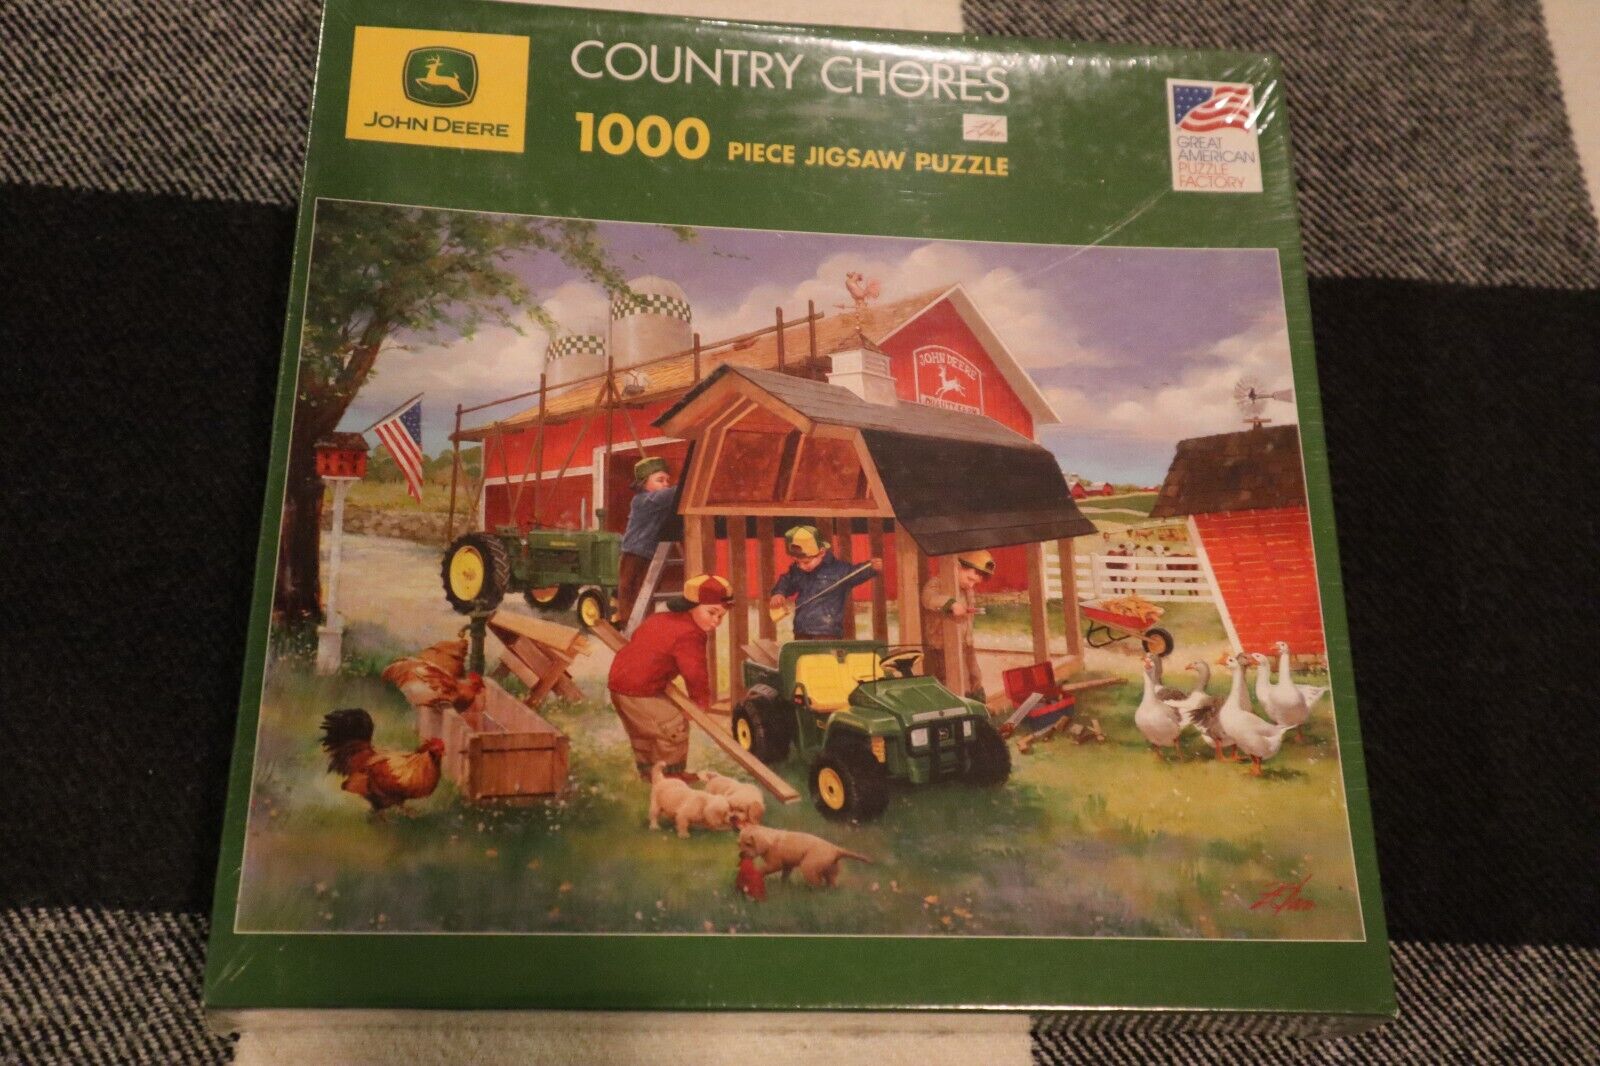 JOHN DEERE COUNTRY CHORES 1000 PIECE JIGSAW PUZZLE 2007 NEW !